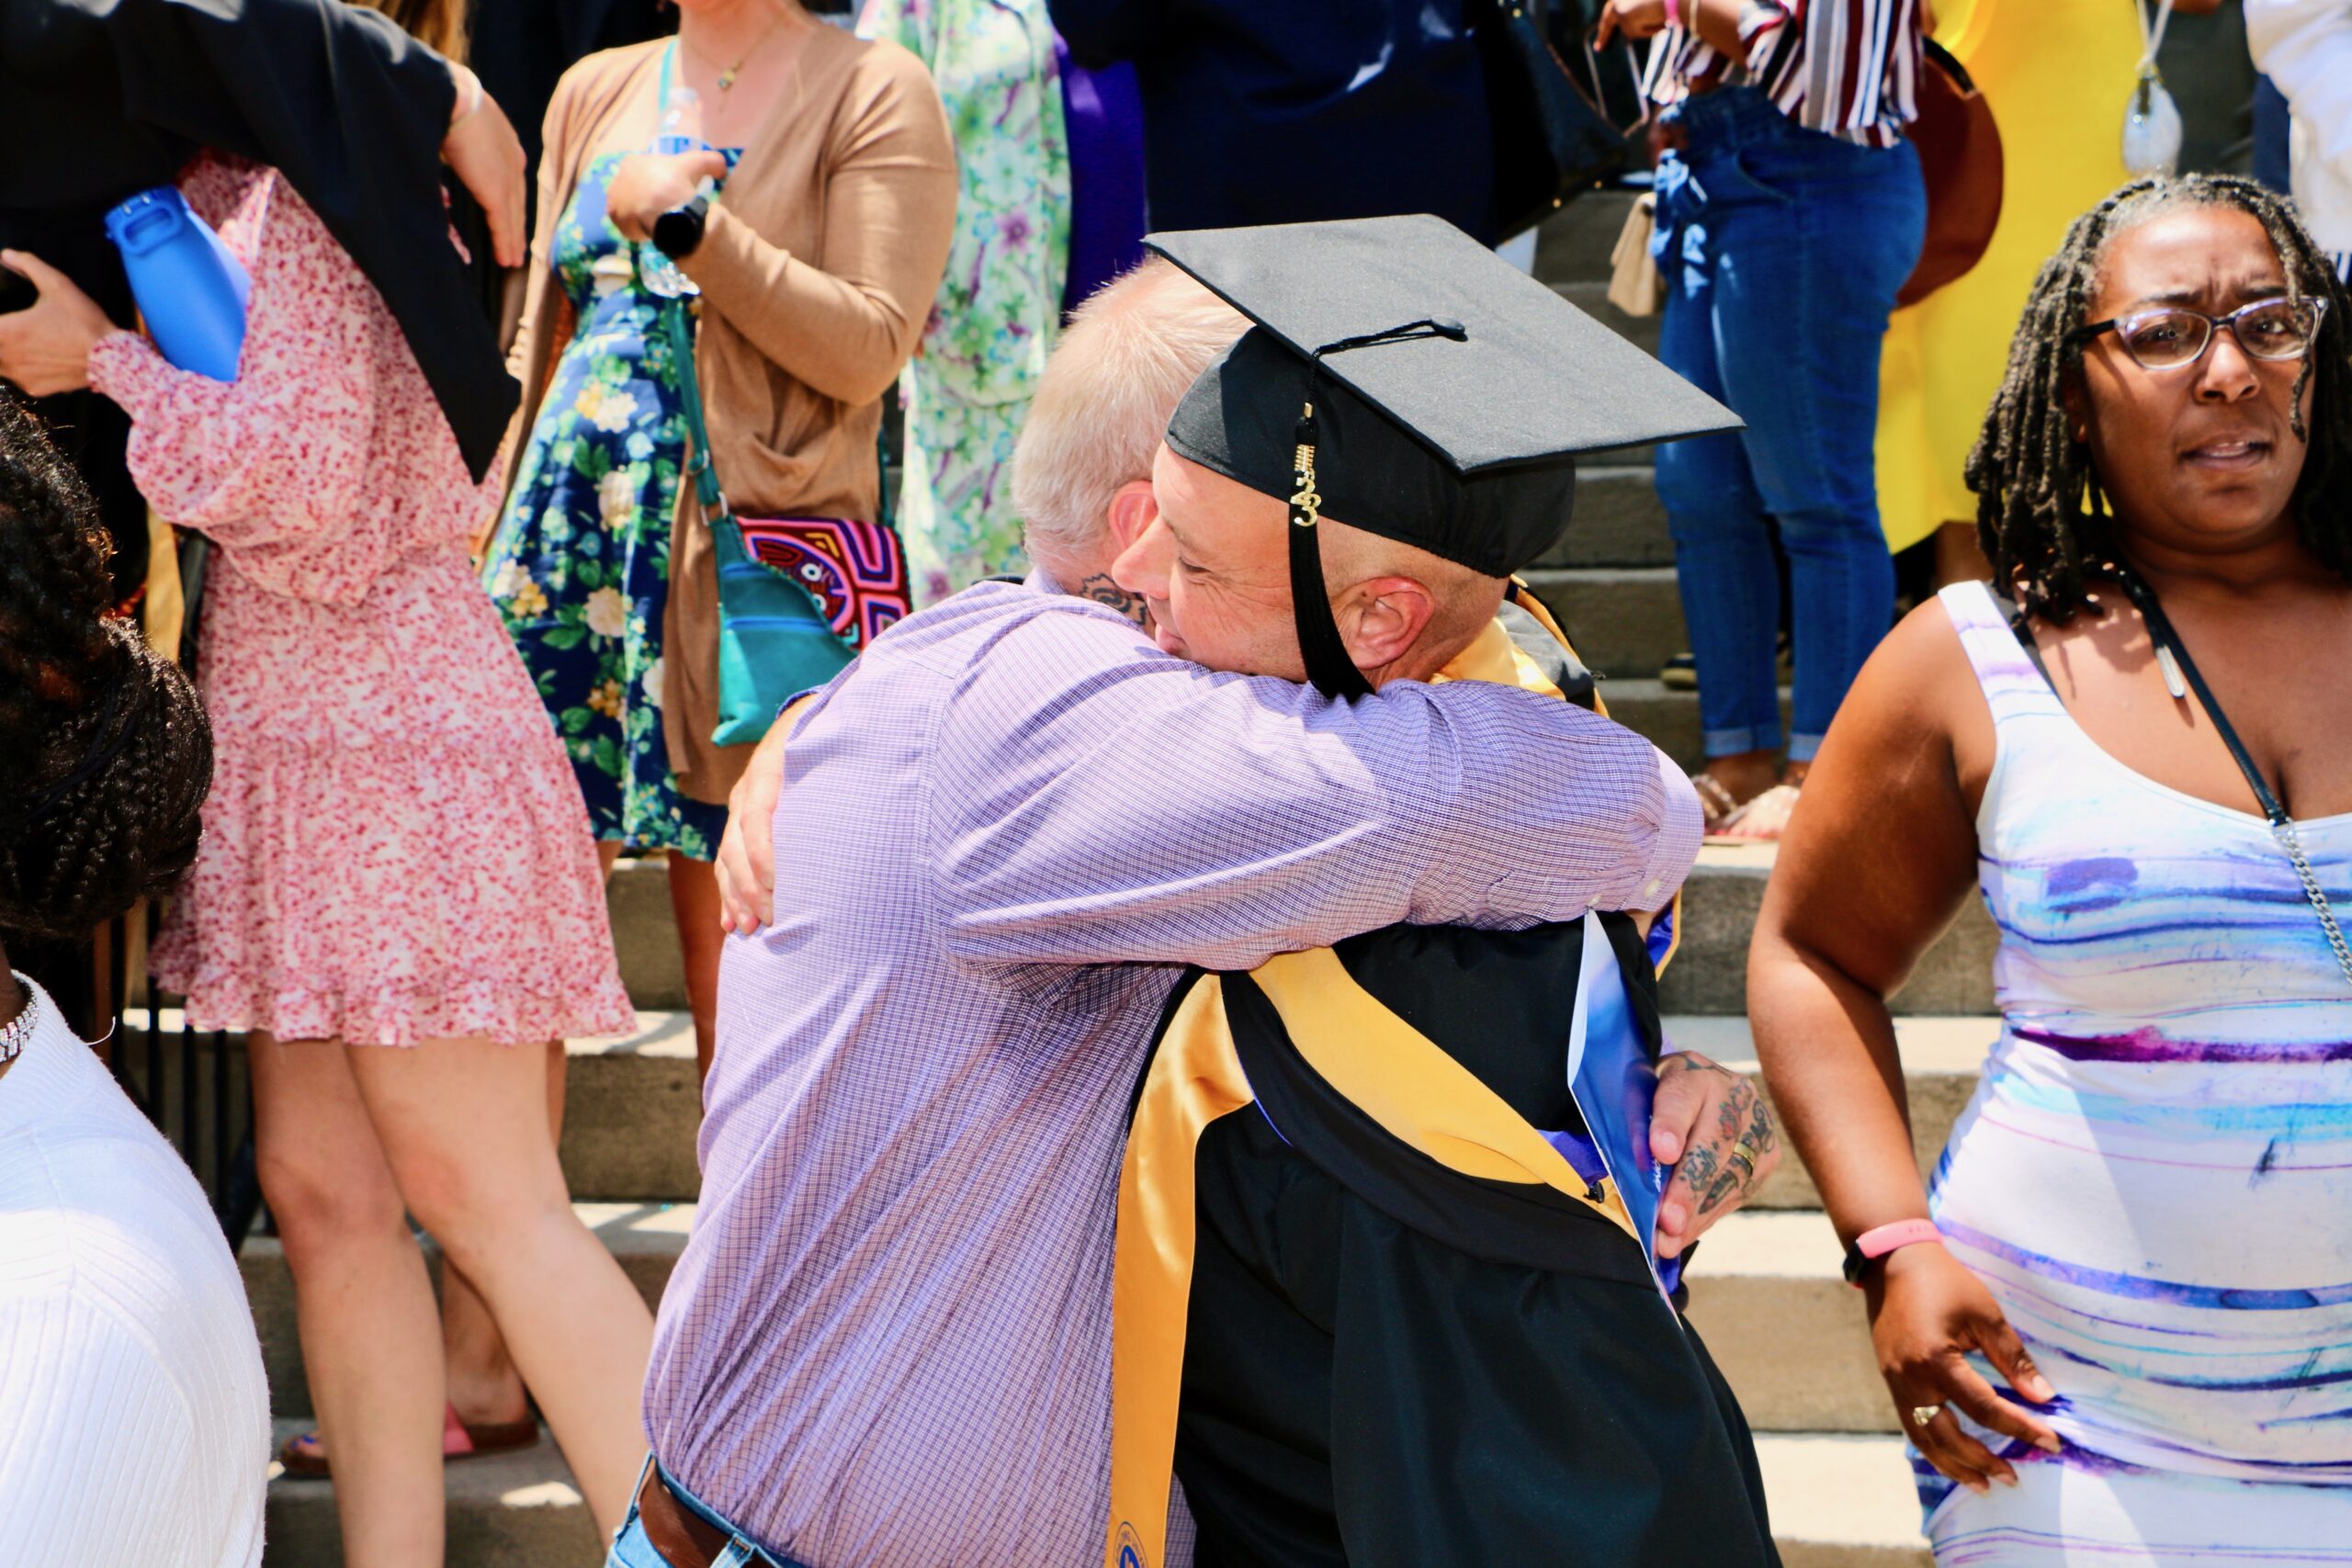 Spalding master's graduate and their dad hugging outside